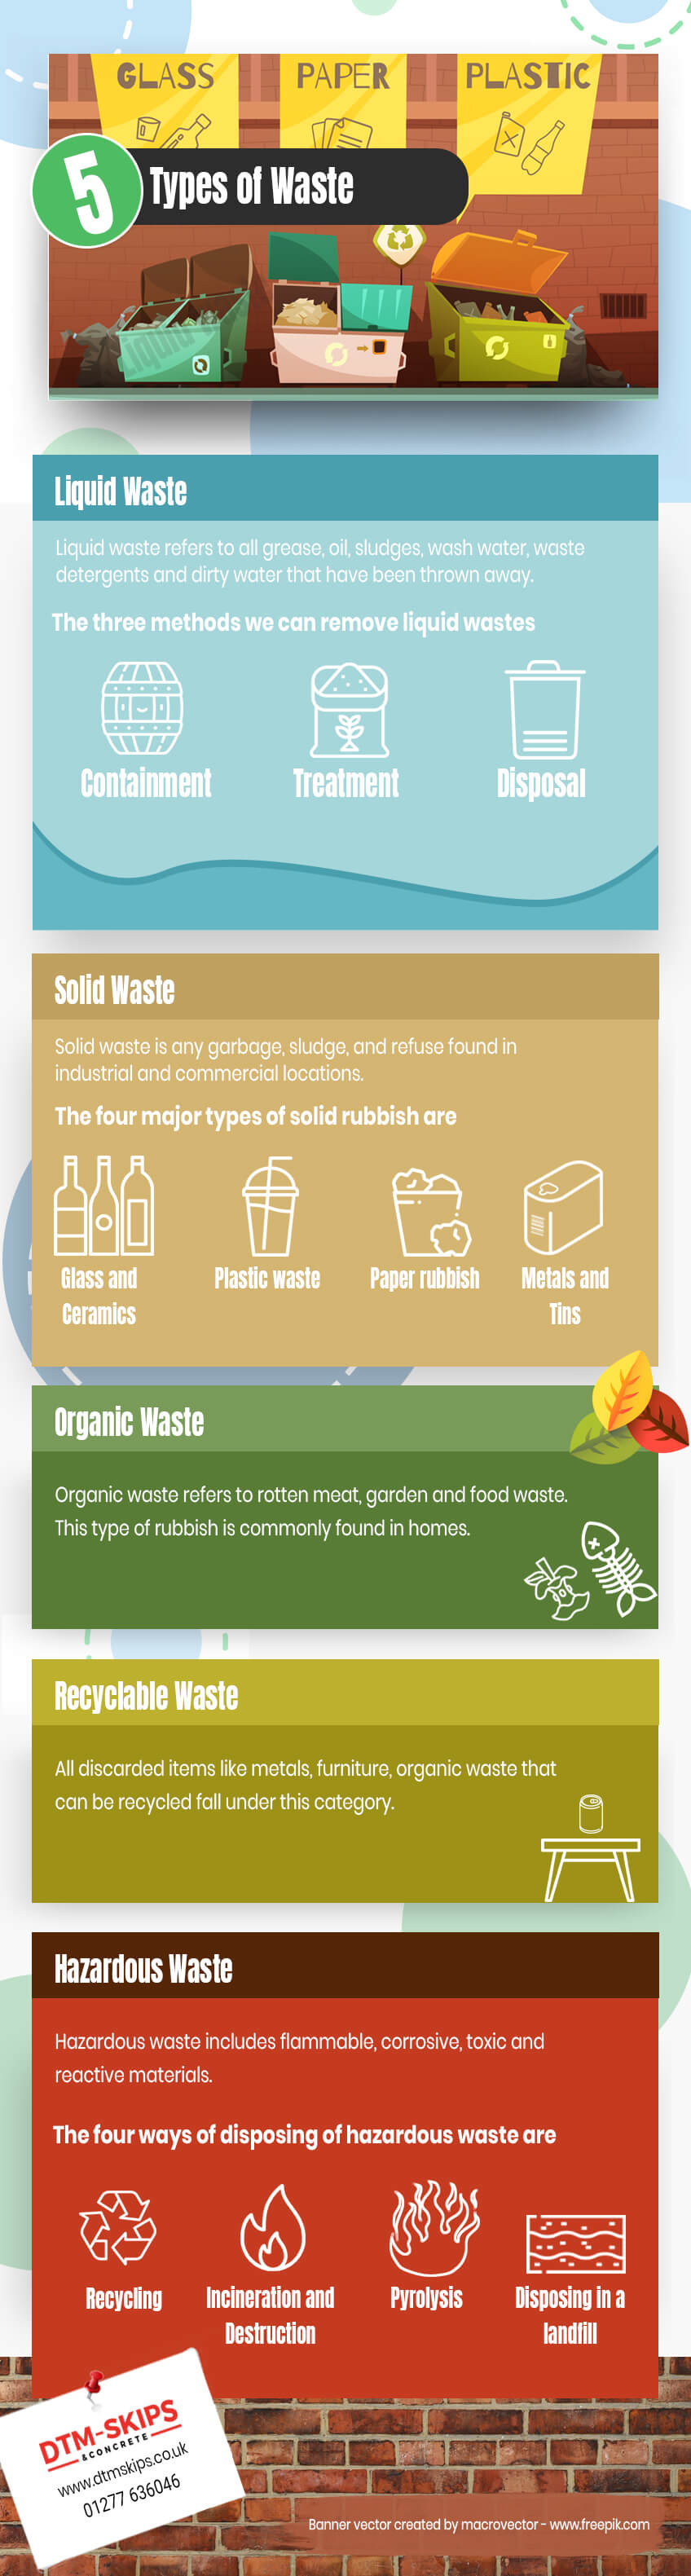 Types-of-Waste